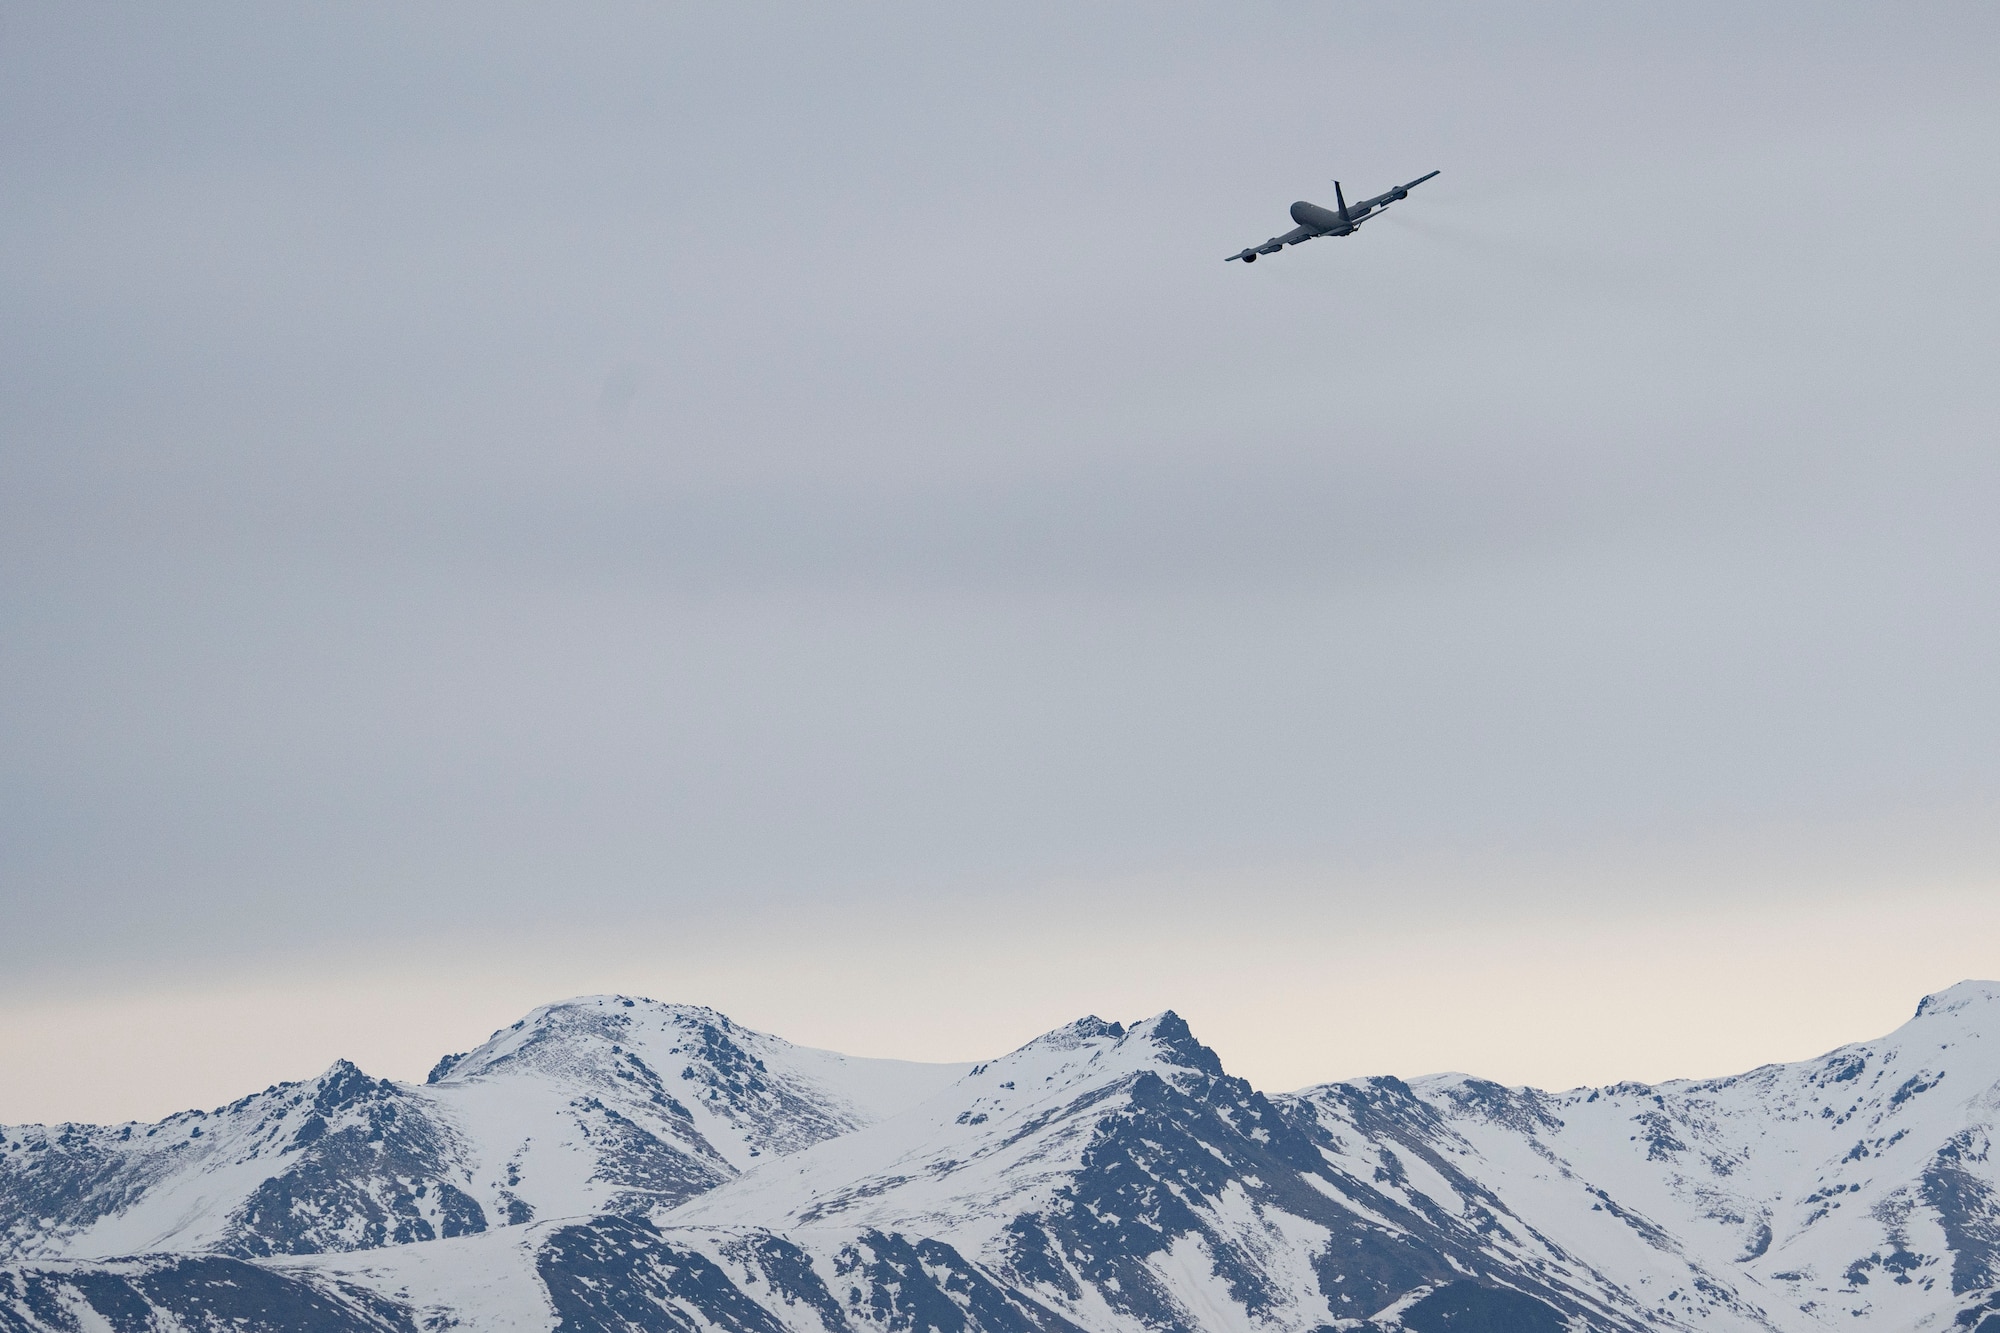 A U.S. Air Force KC-135 Stratotanker assigned to the 909th Air Refueling Squadron, Kadena Air Base, Japan, takes off during RED FLAG-Alaska 24-1 at Joint Base Elmendorf-Richardson, Alaska, April 19, 2024. The Indo-Pacific is a top priority for the United States and the DoD; exercises like RF-A display a commitment to ensuring U.S. forces are capable and ready to face the evolving challenges in the region. (U.S. Air Force photo by Senior Airman Julia Lebens)